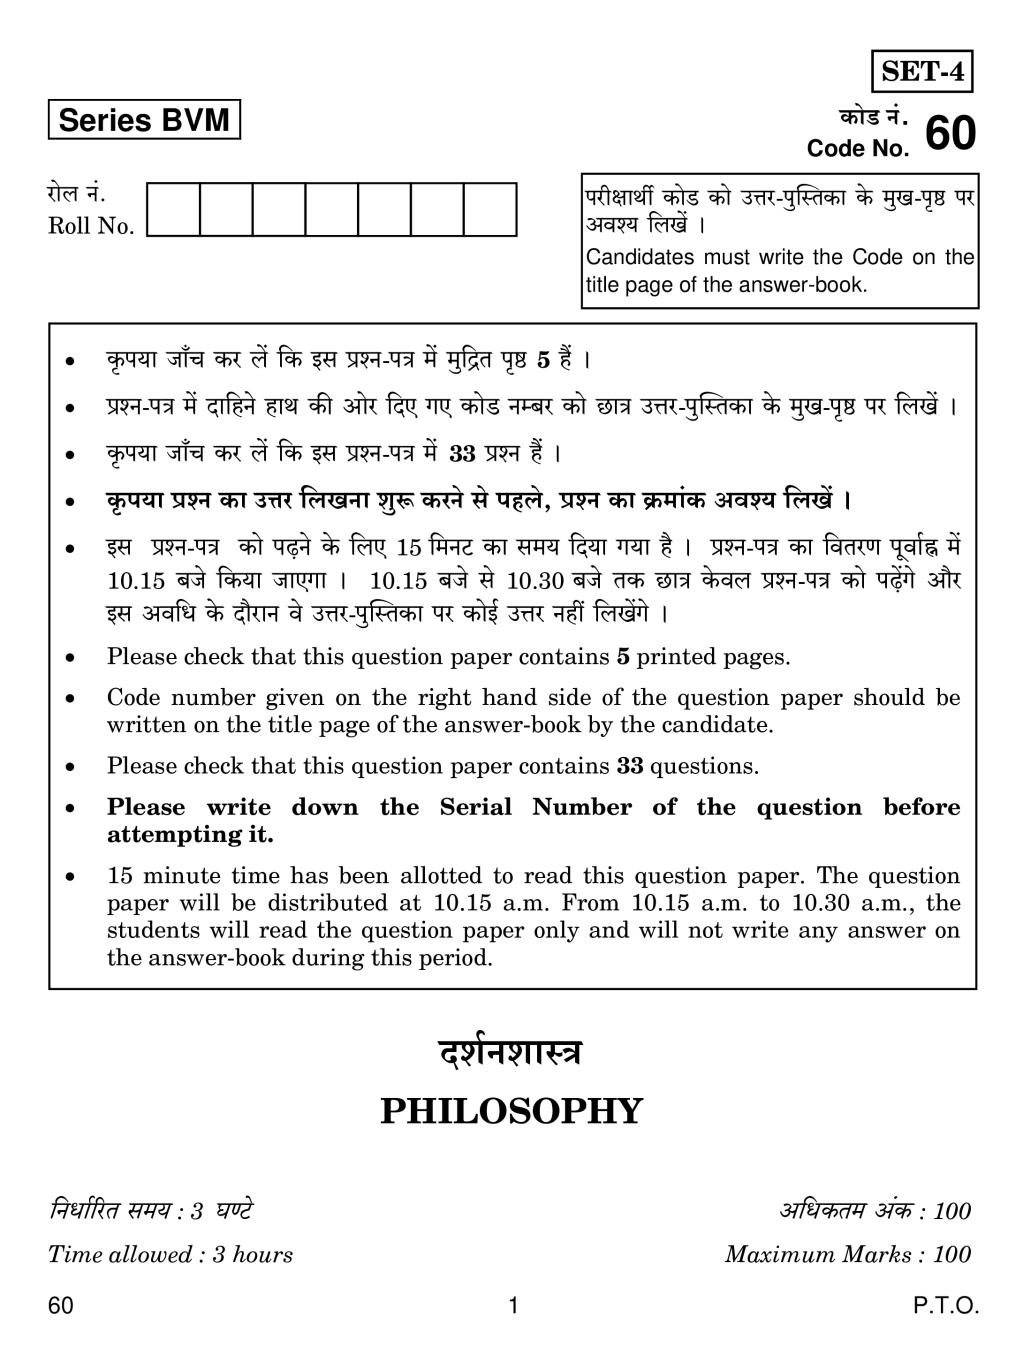 CBSE Class 12 Philosophy Question Paper 2019 - Page 1